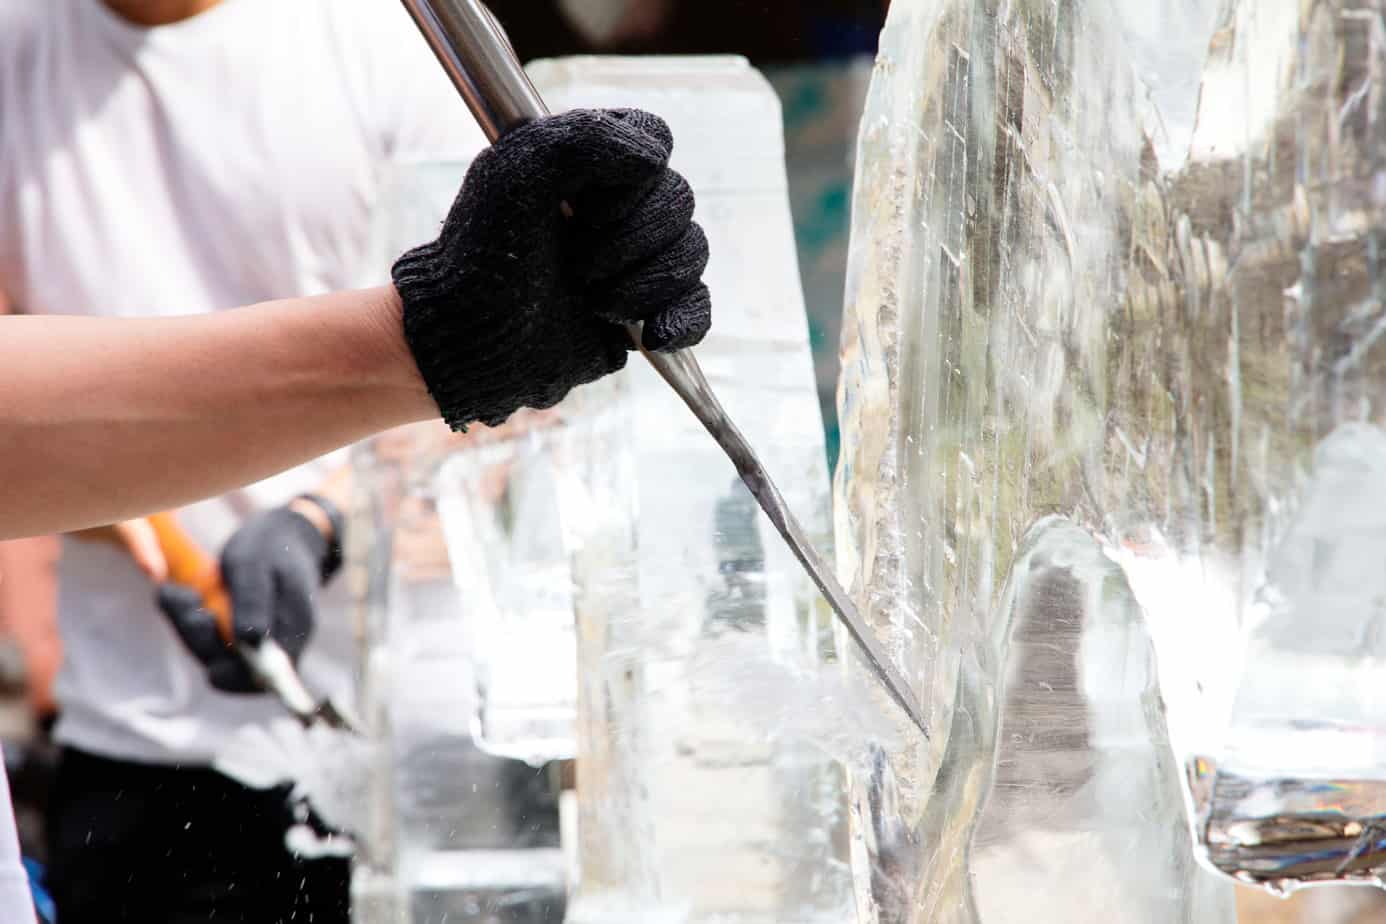 Ice Carving, Ice-Carving